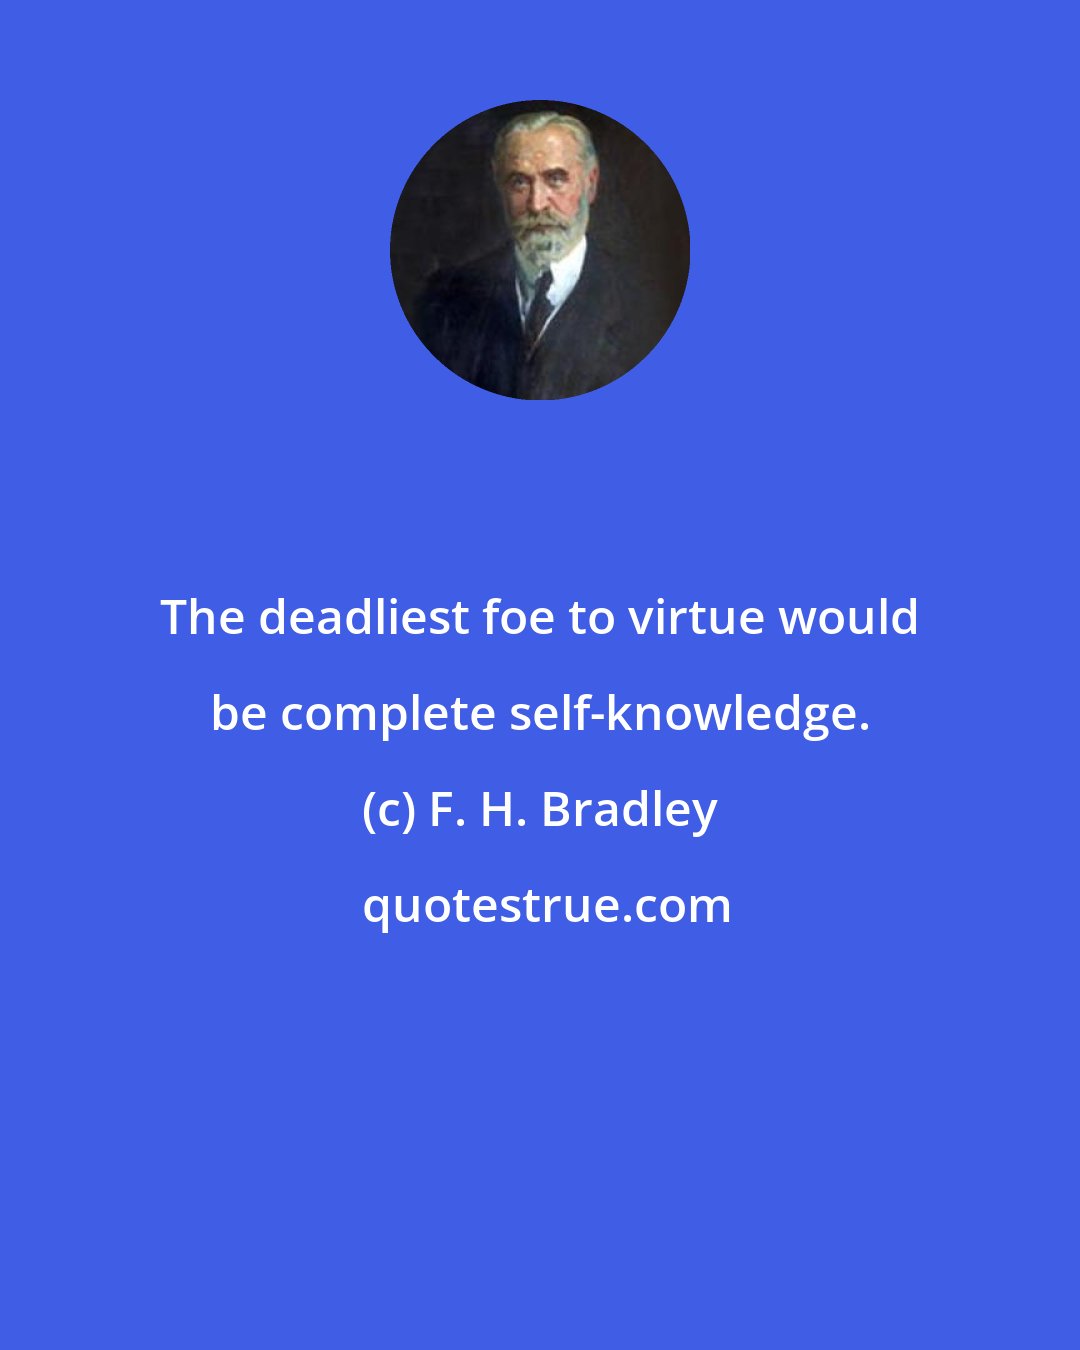 F. H. Bradley: The deadliest foe to virtue would be complete self-knowledge.